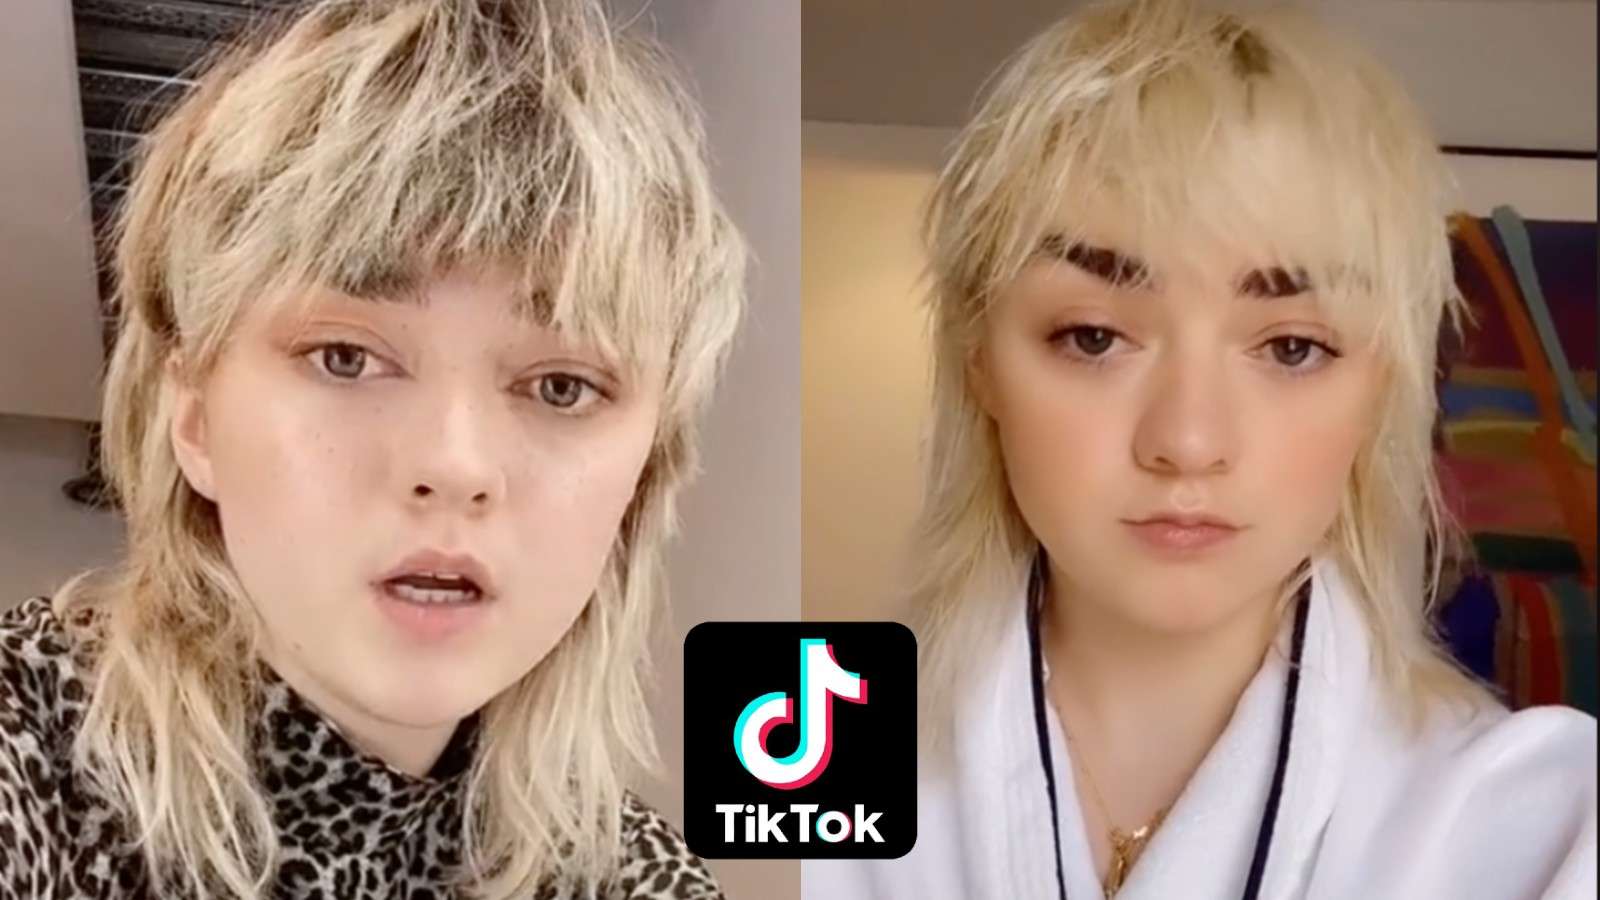 Screencaps of Maisie Williams from two of her TikTok videos